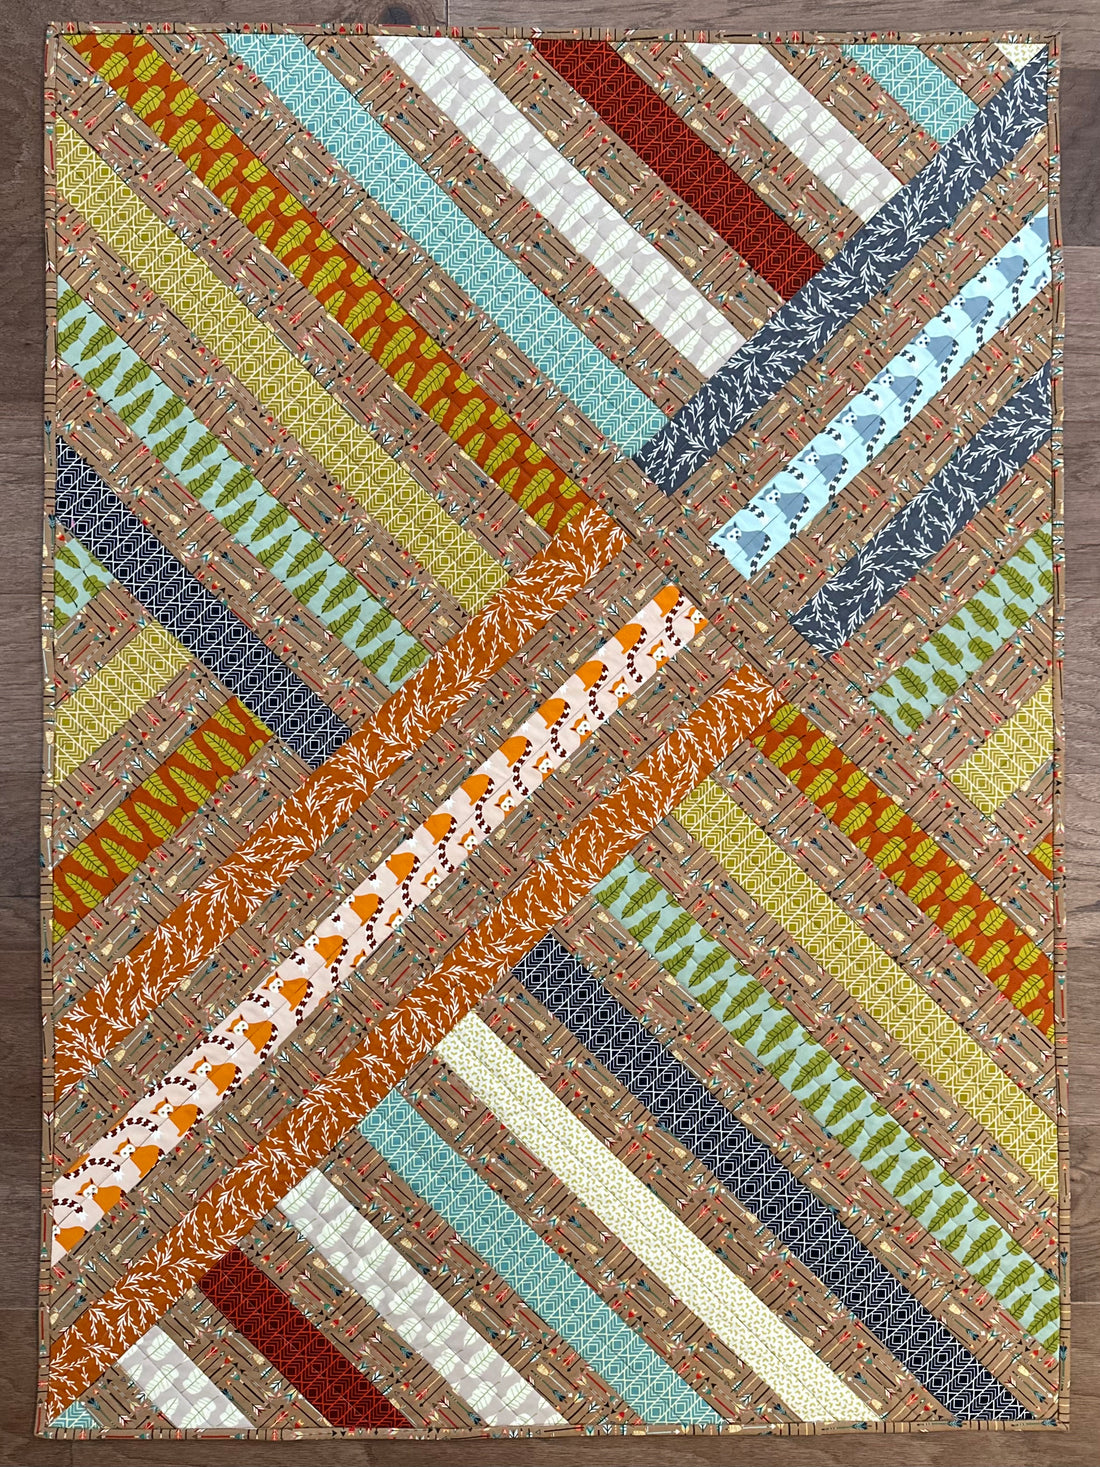 Free quilt pattern and projects